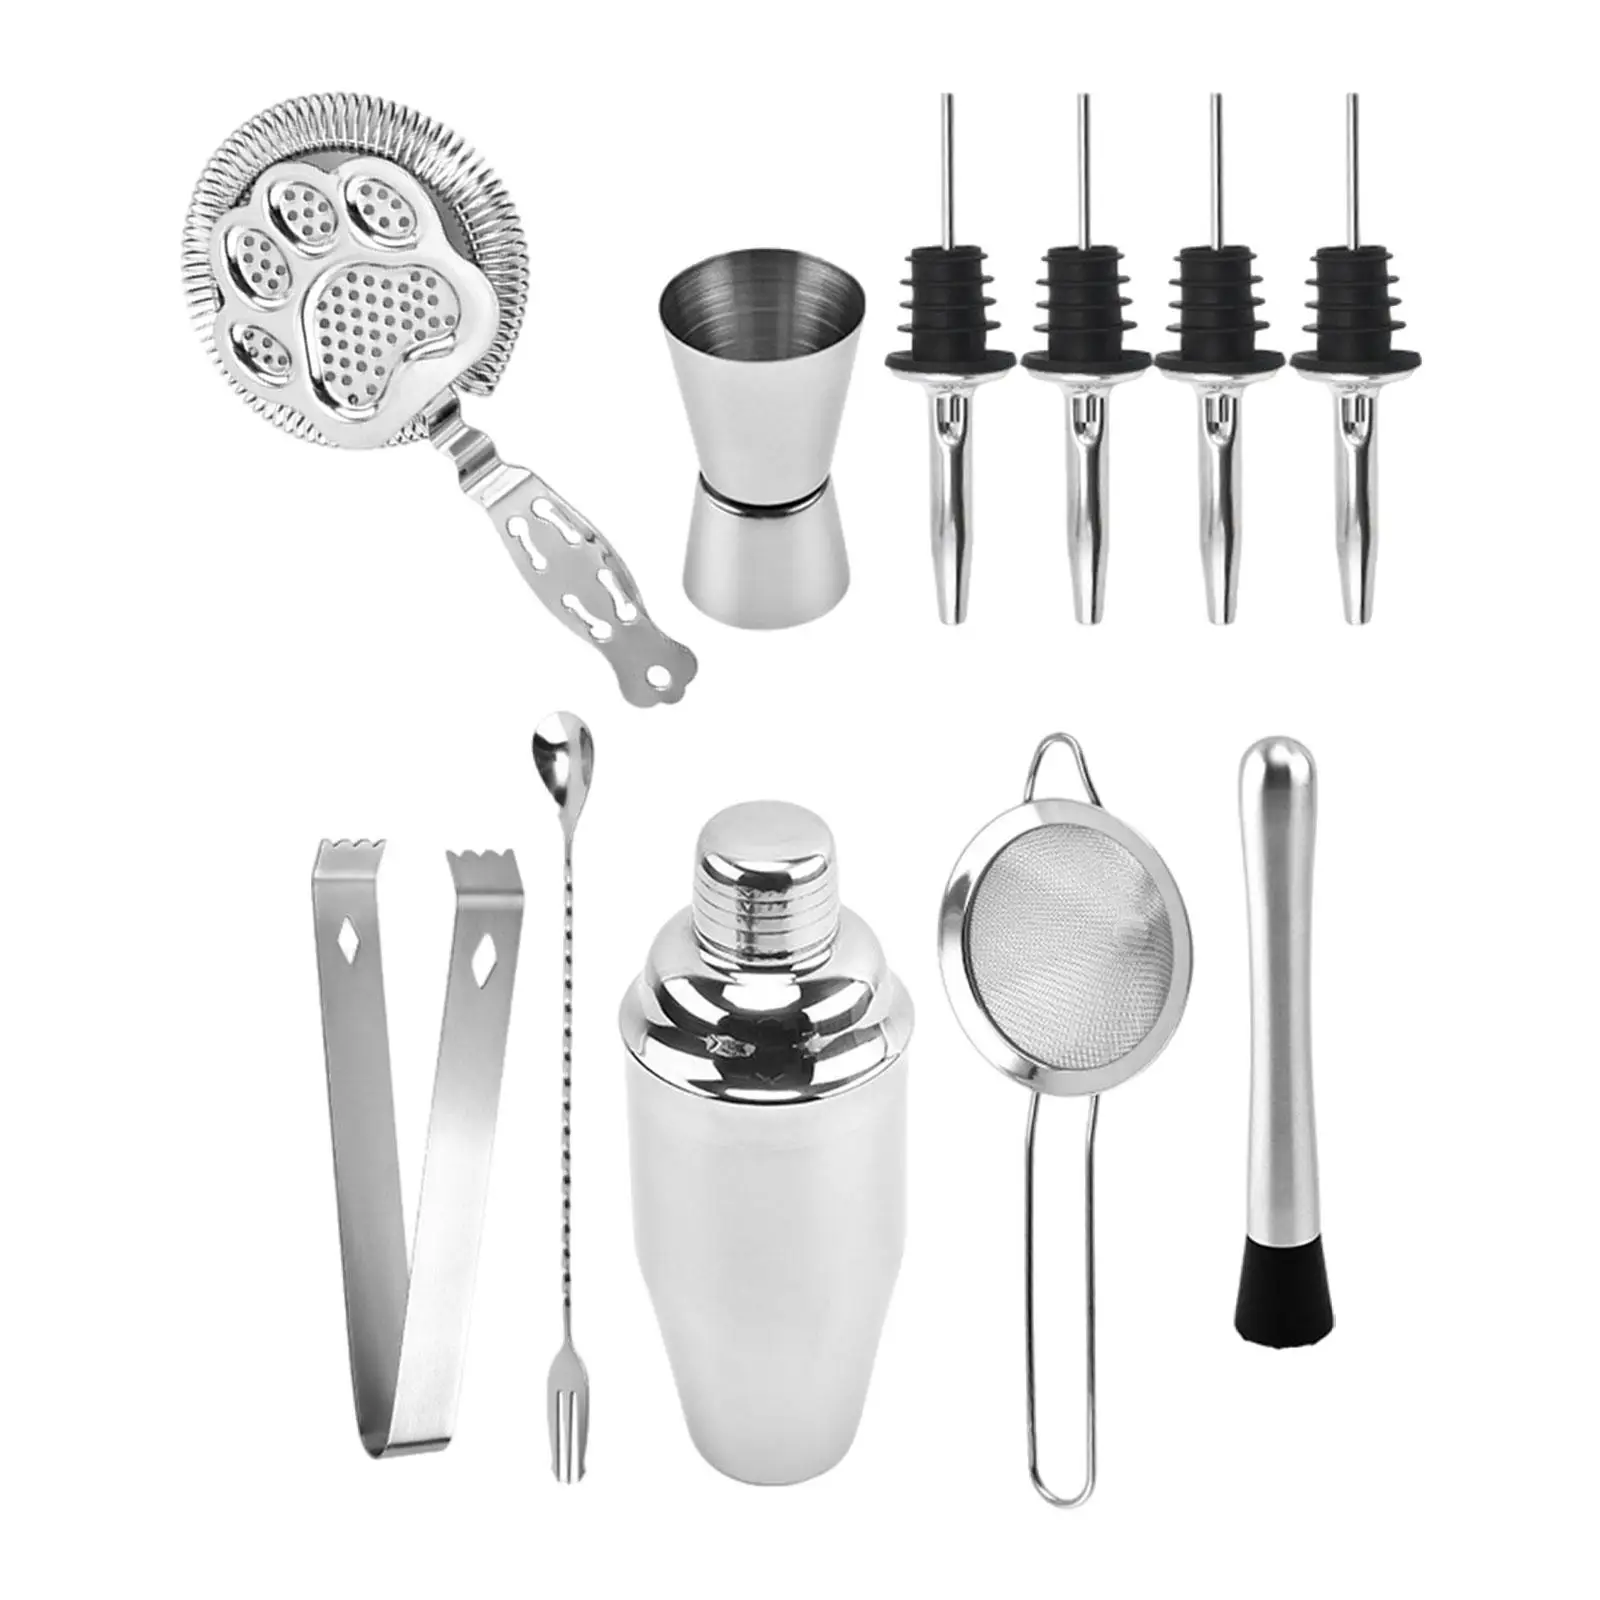 Barware Sets Martini Making Juice Making Kits Cocktail Making Set Bartender Shaker for Home Birthday Gifts Traveling Party Drink